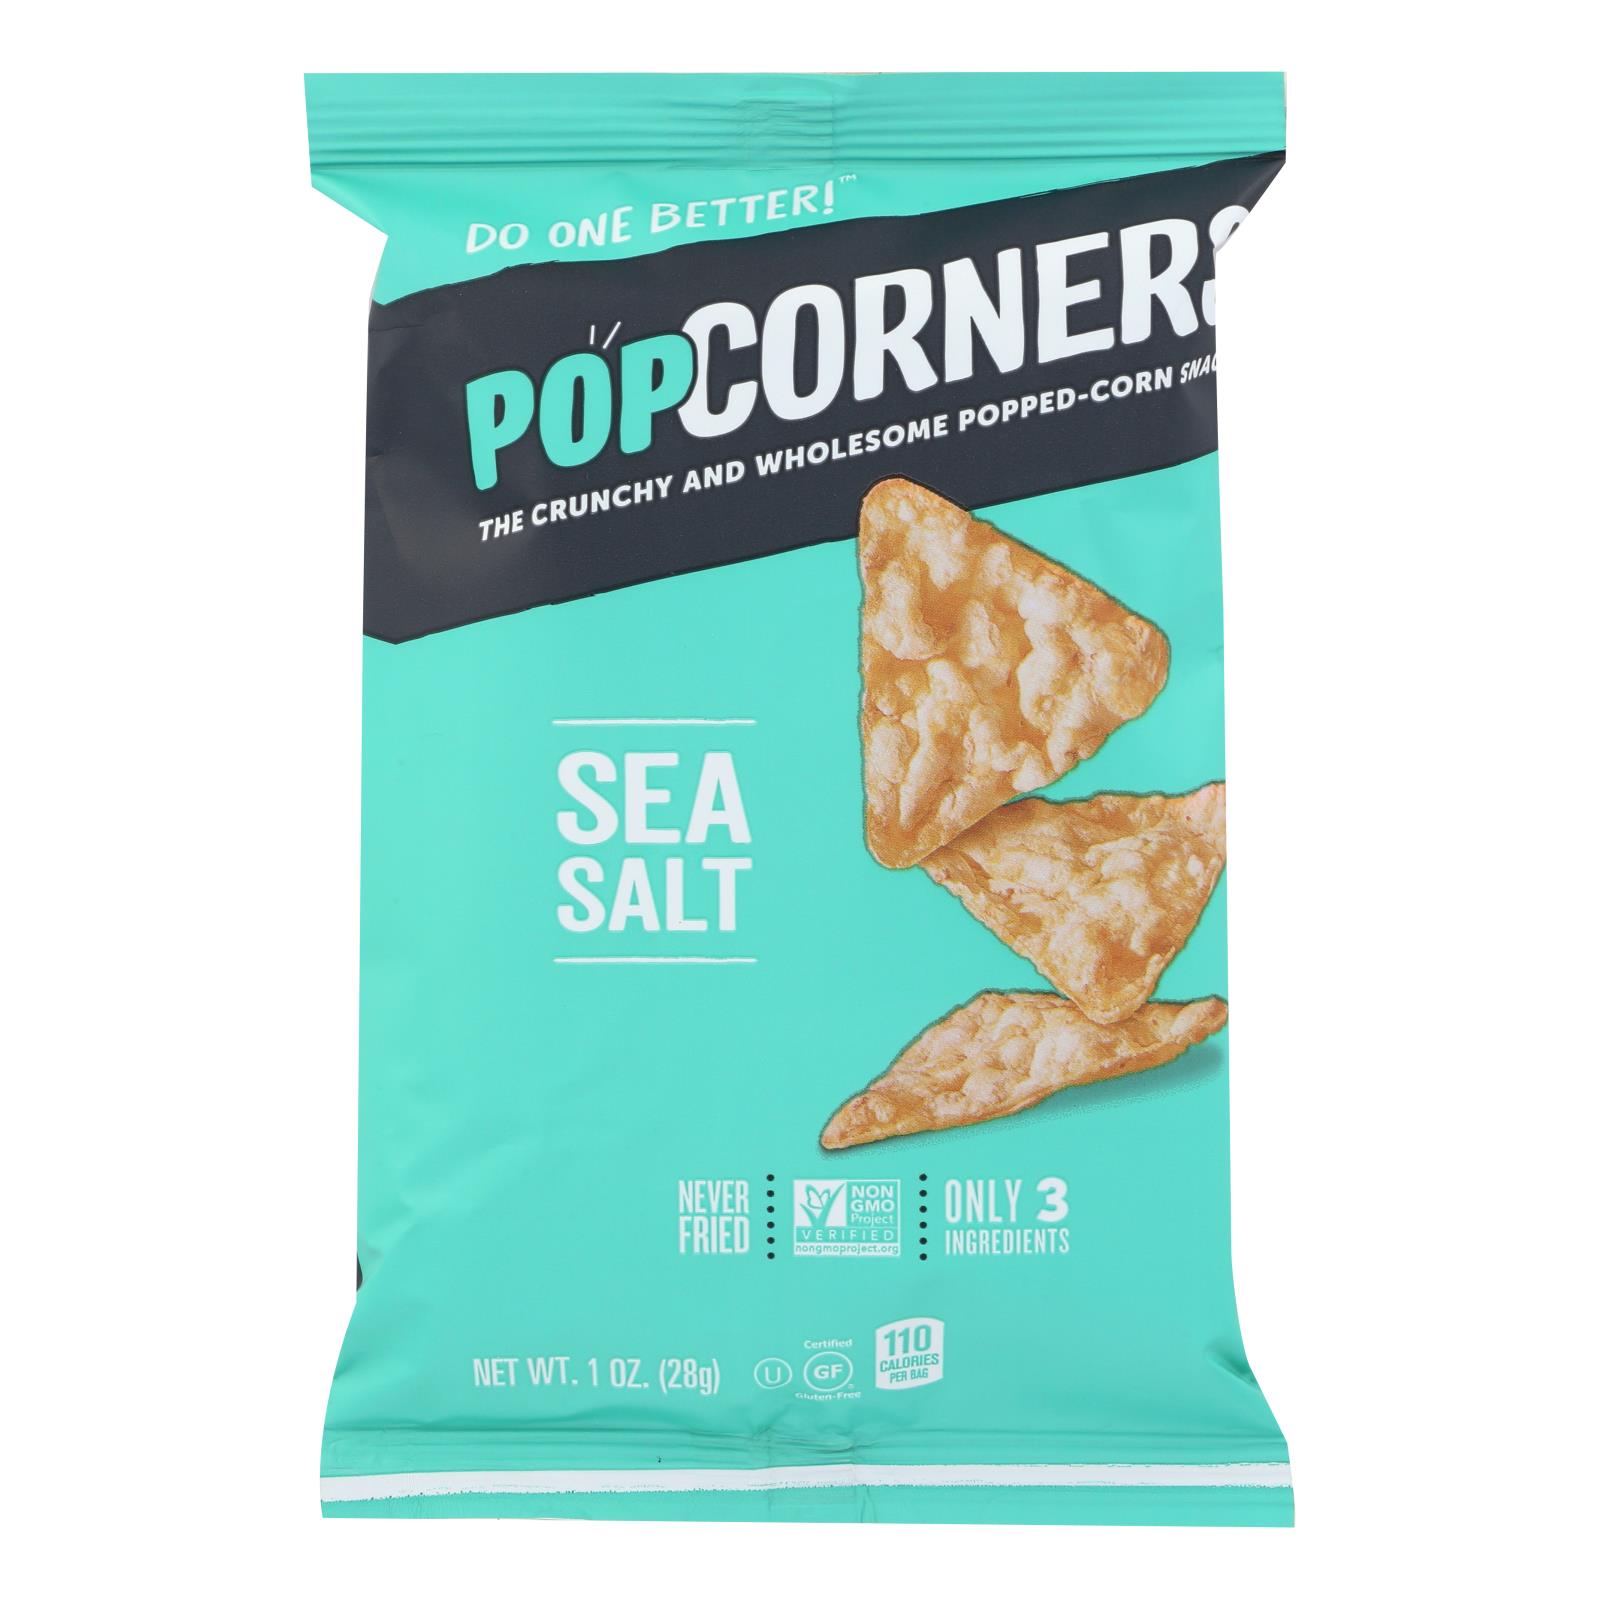 Our Little Rebellion Popcorners, Salt Of The Earth - Case of 40 - 1 OZ